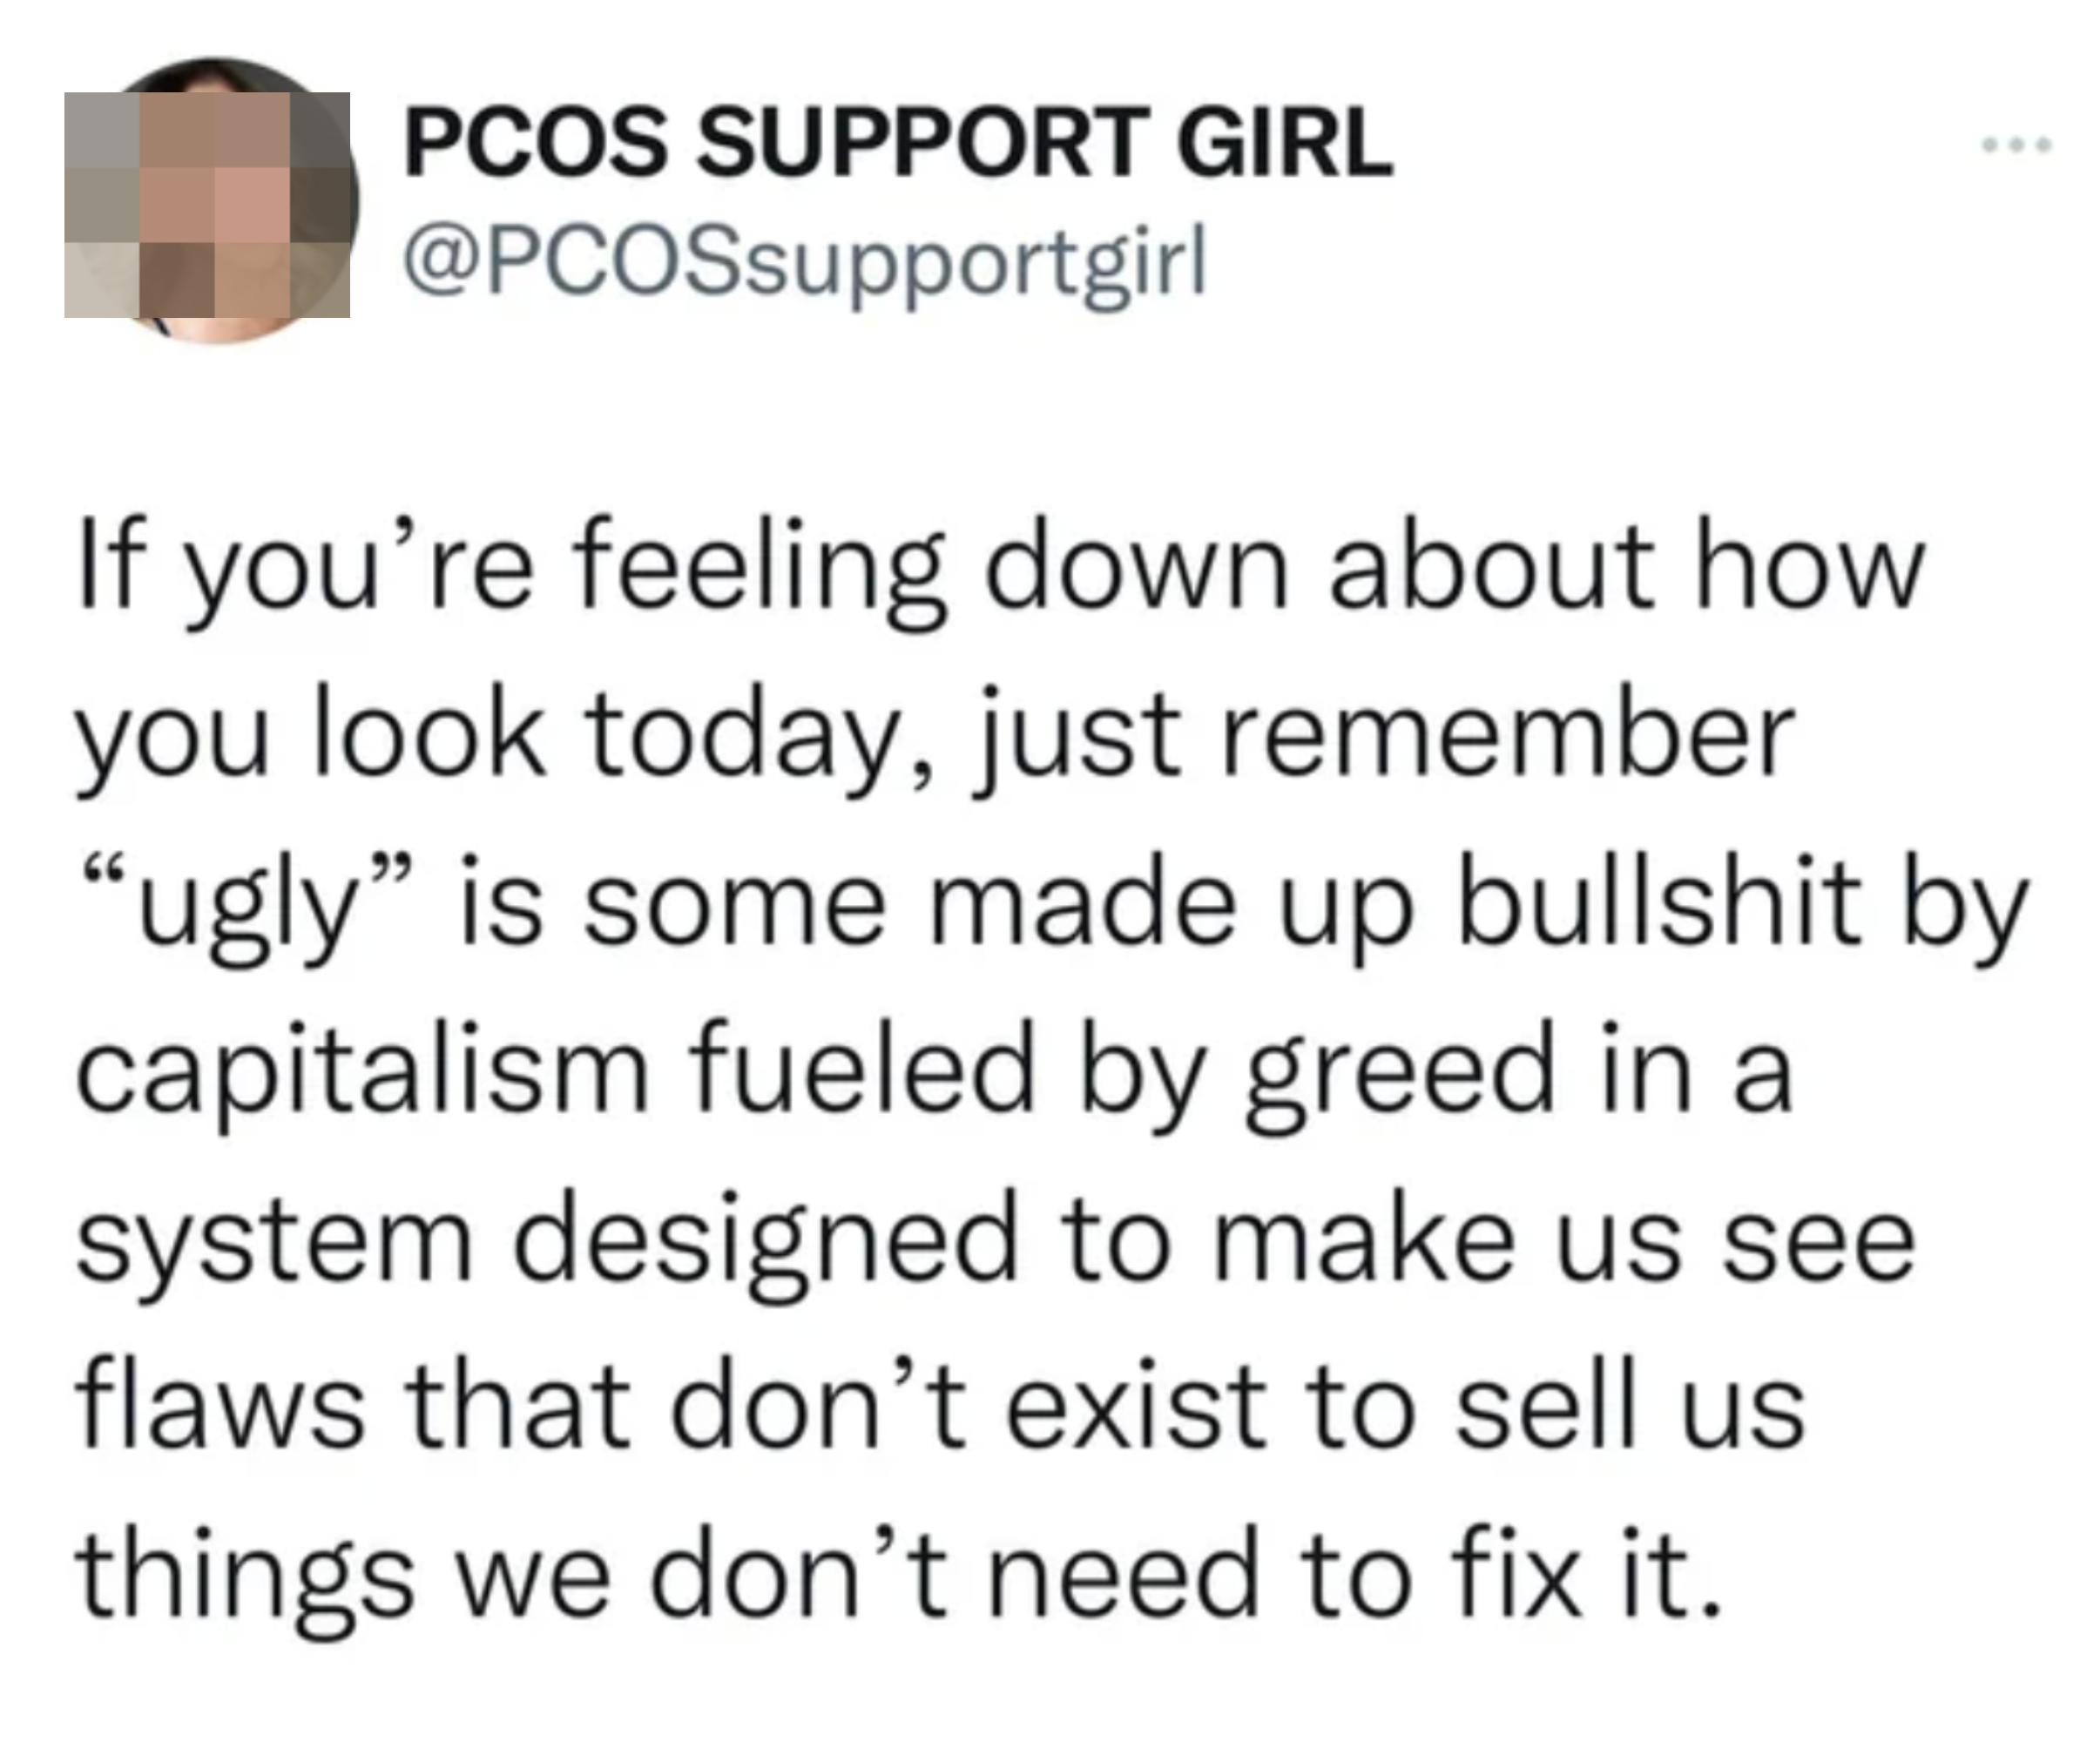 &quot;If you&#x27;re feeling down about how you look today, just remember &#x27;ugly&#x27; is some made-up bullshit by capitalism fueled by greed in a system designed to make us see flaws that don&#x27;t exist to sell us things we don&#x27;t need to fix it&quot;